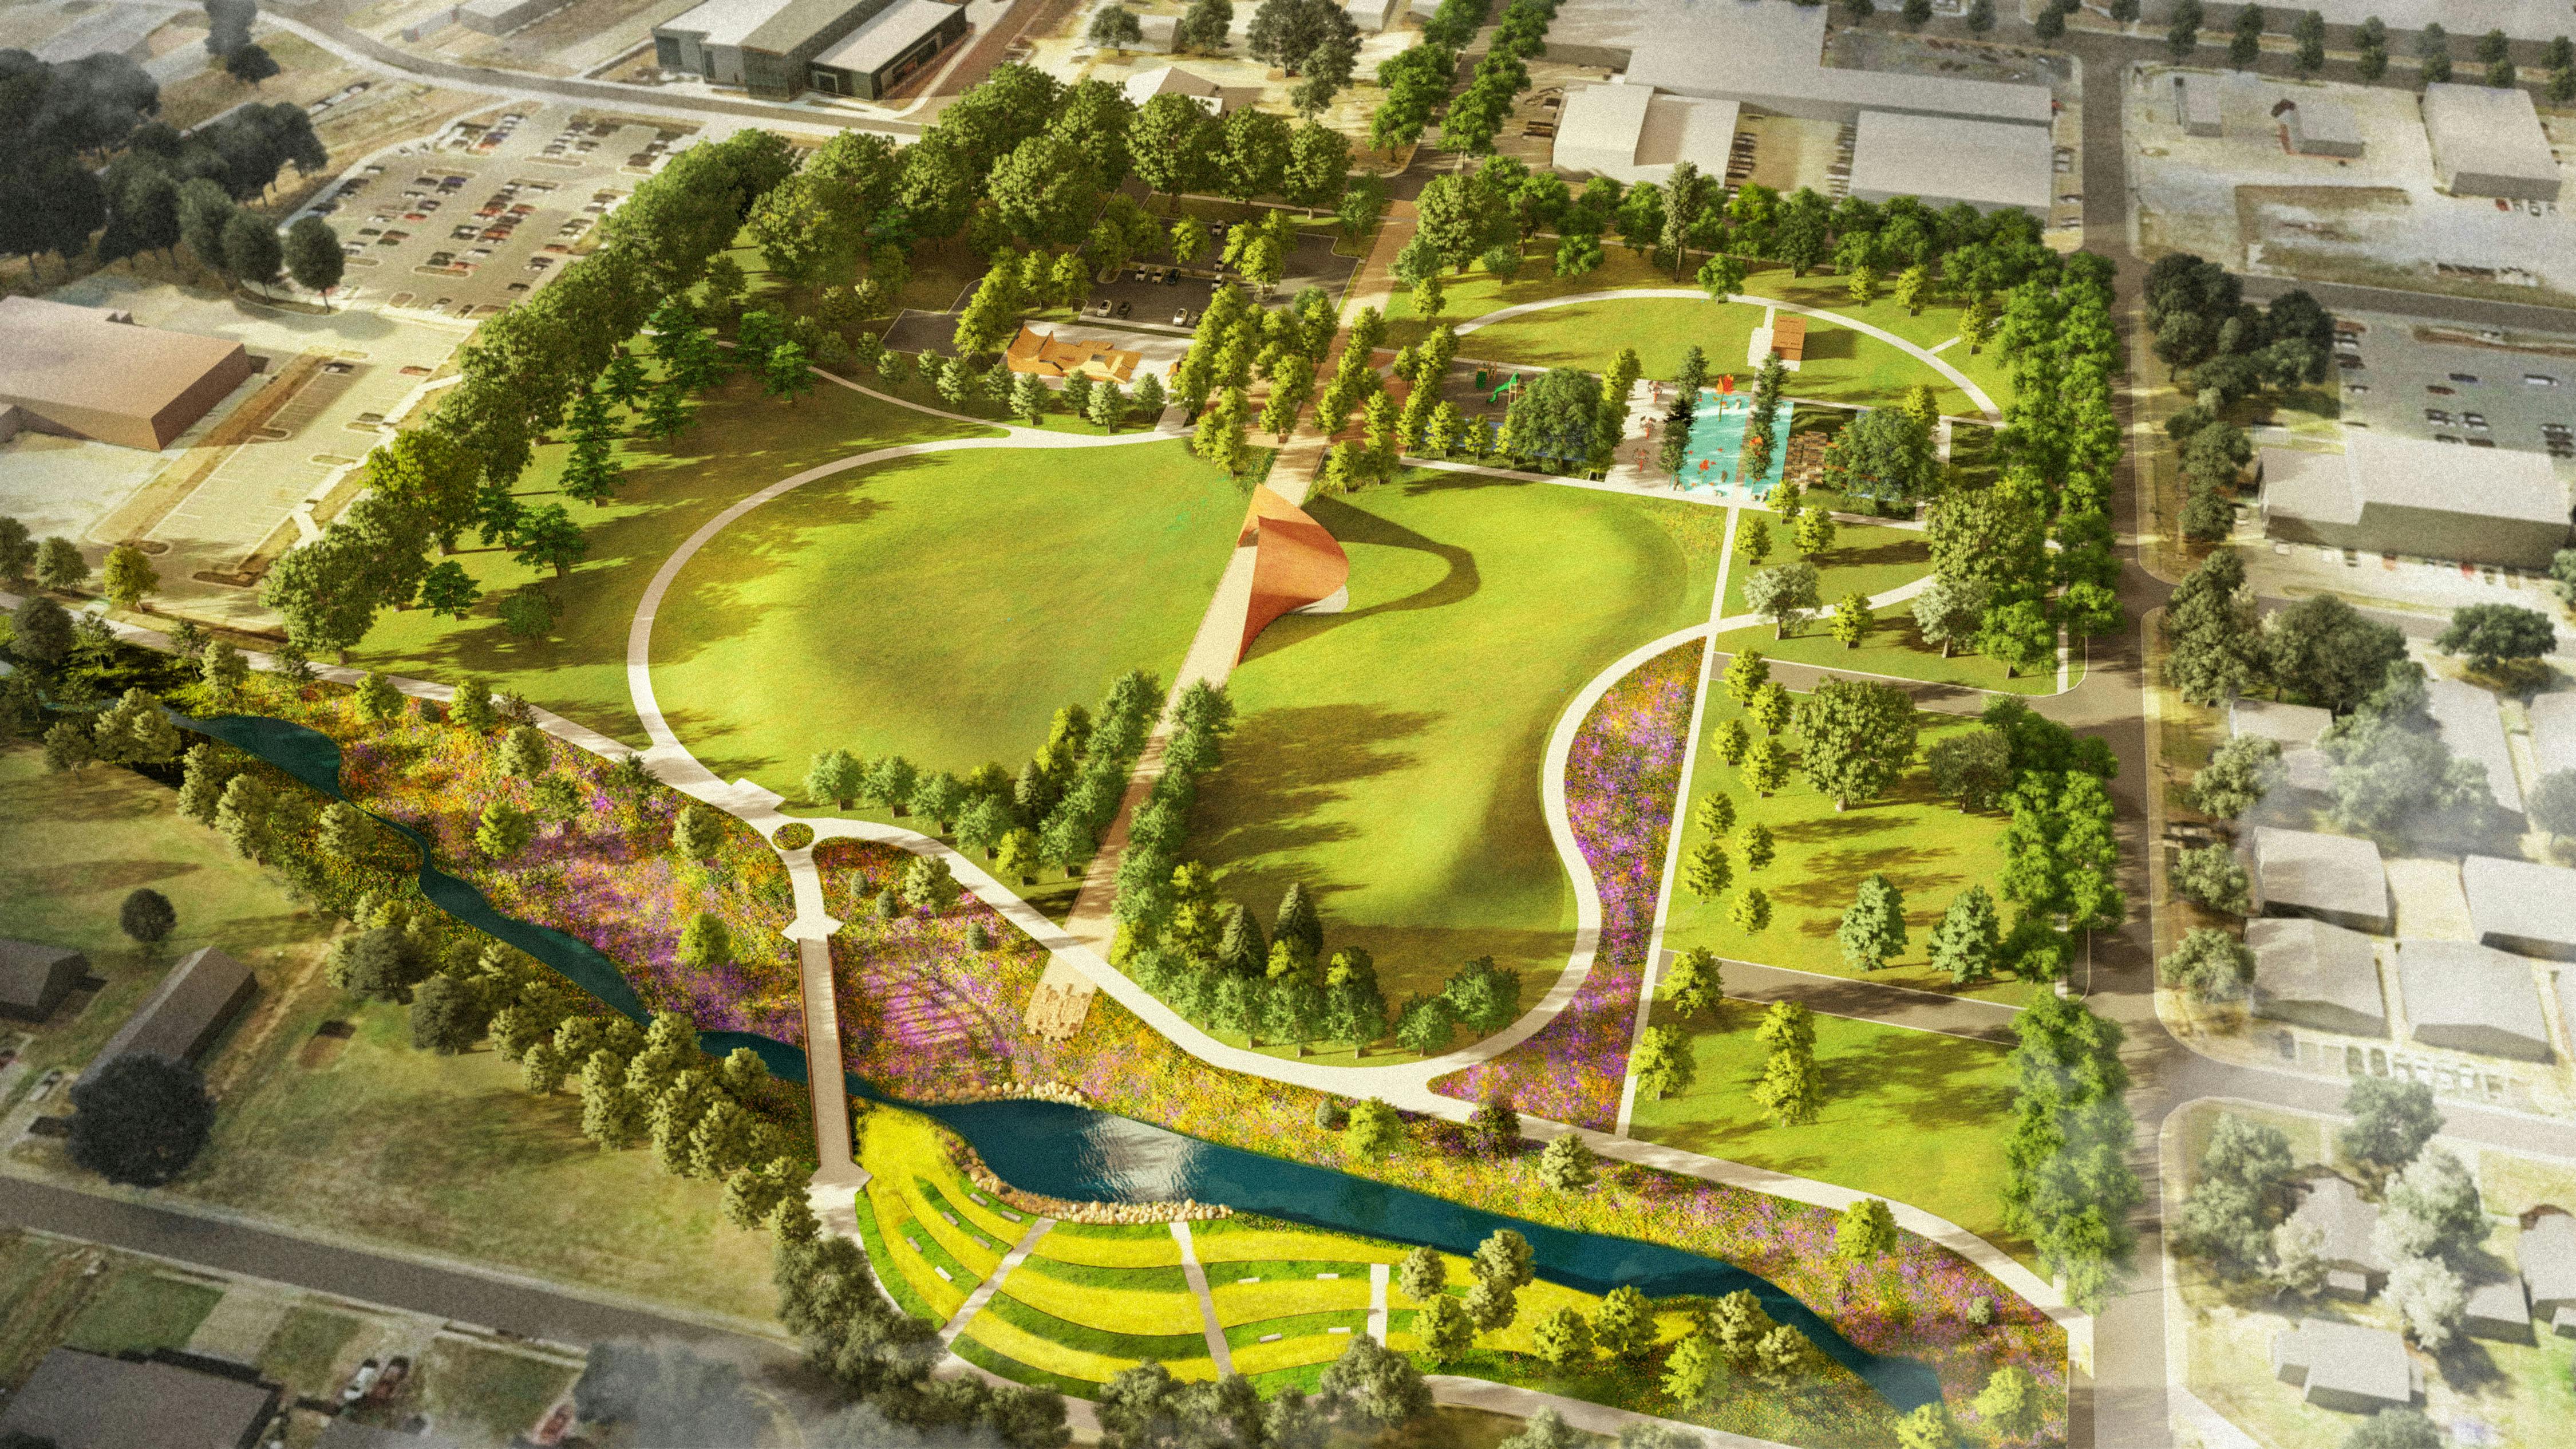 Bird's eye perspective rendering of park development plan showcasing a centrally located performance pavilion, a main park path leading to an existing creek, a meandering path, newly designed playground, integrated into park's landscape.